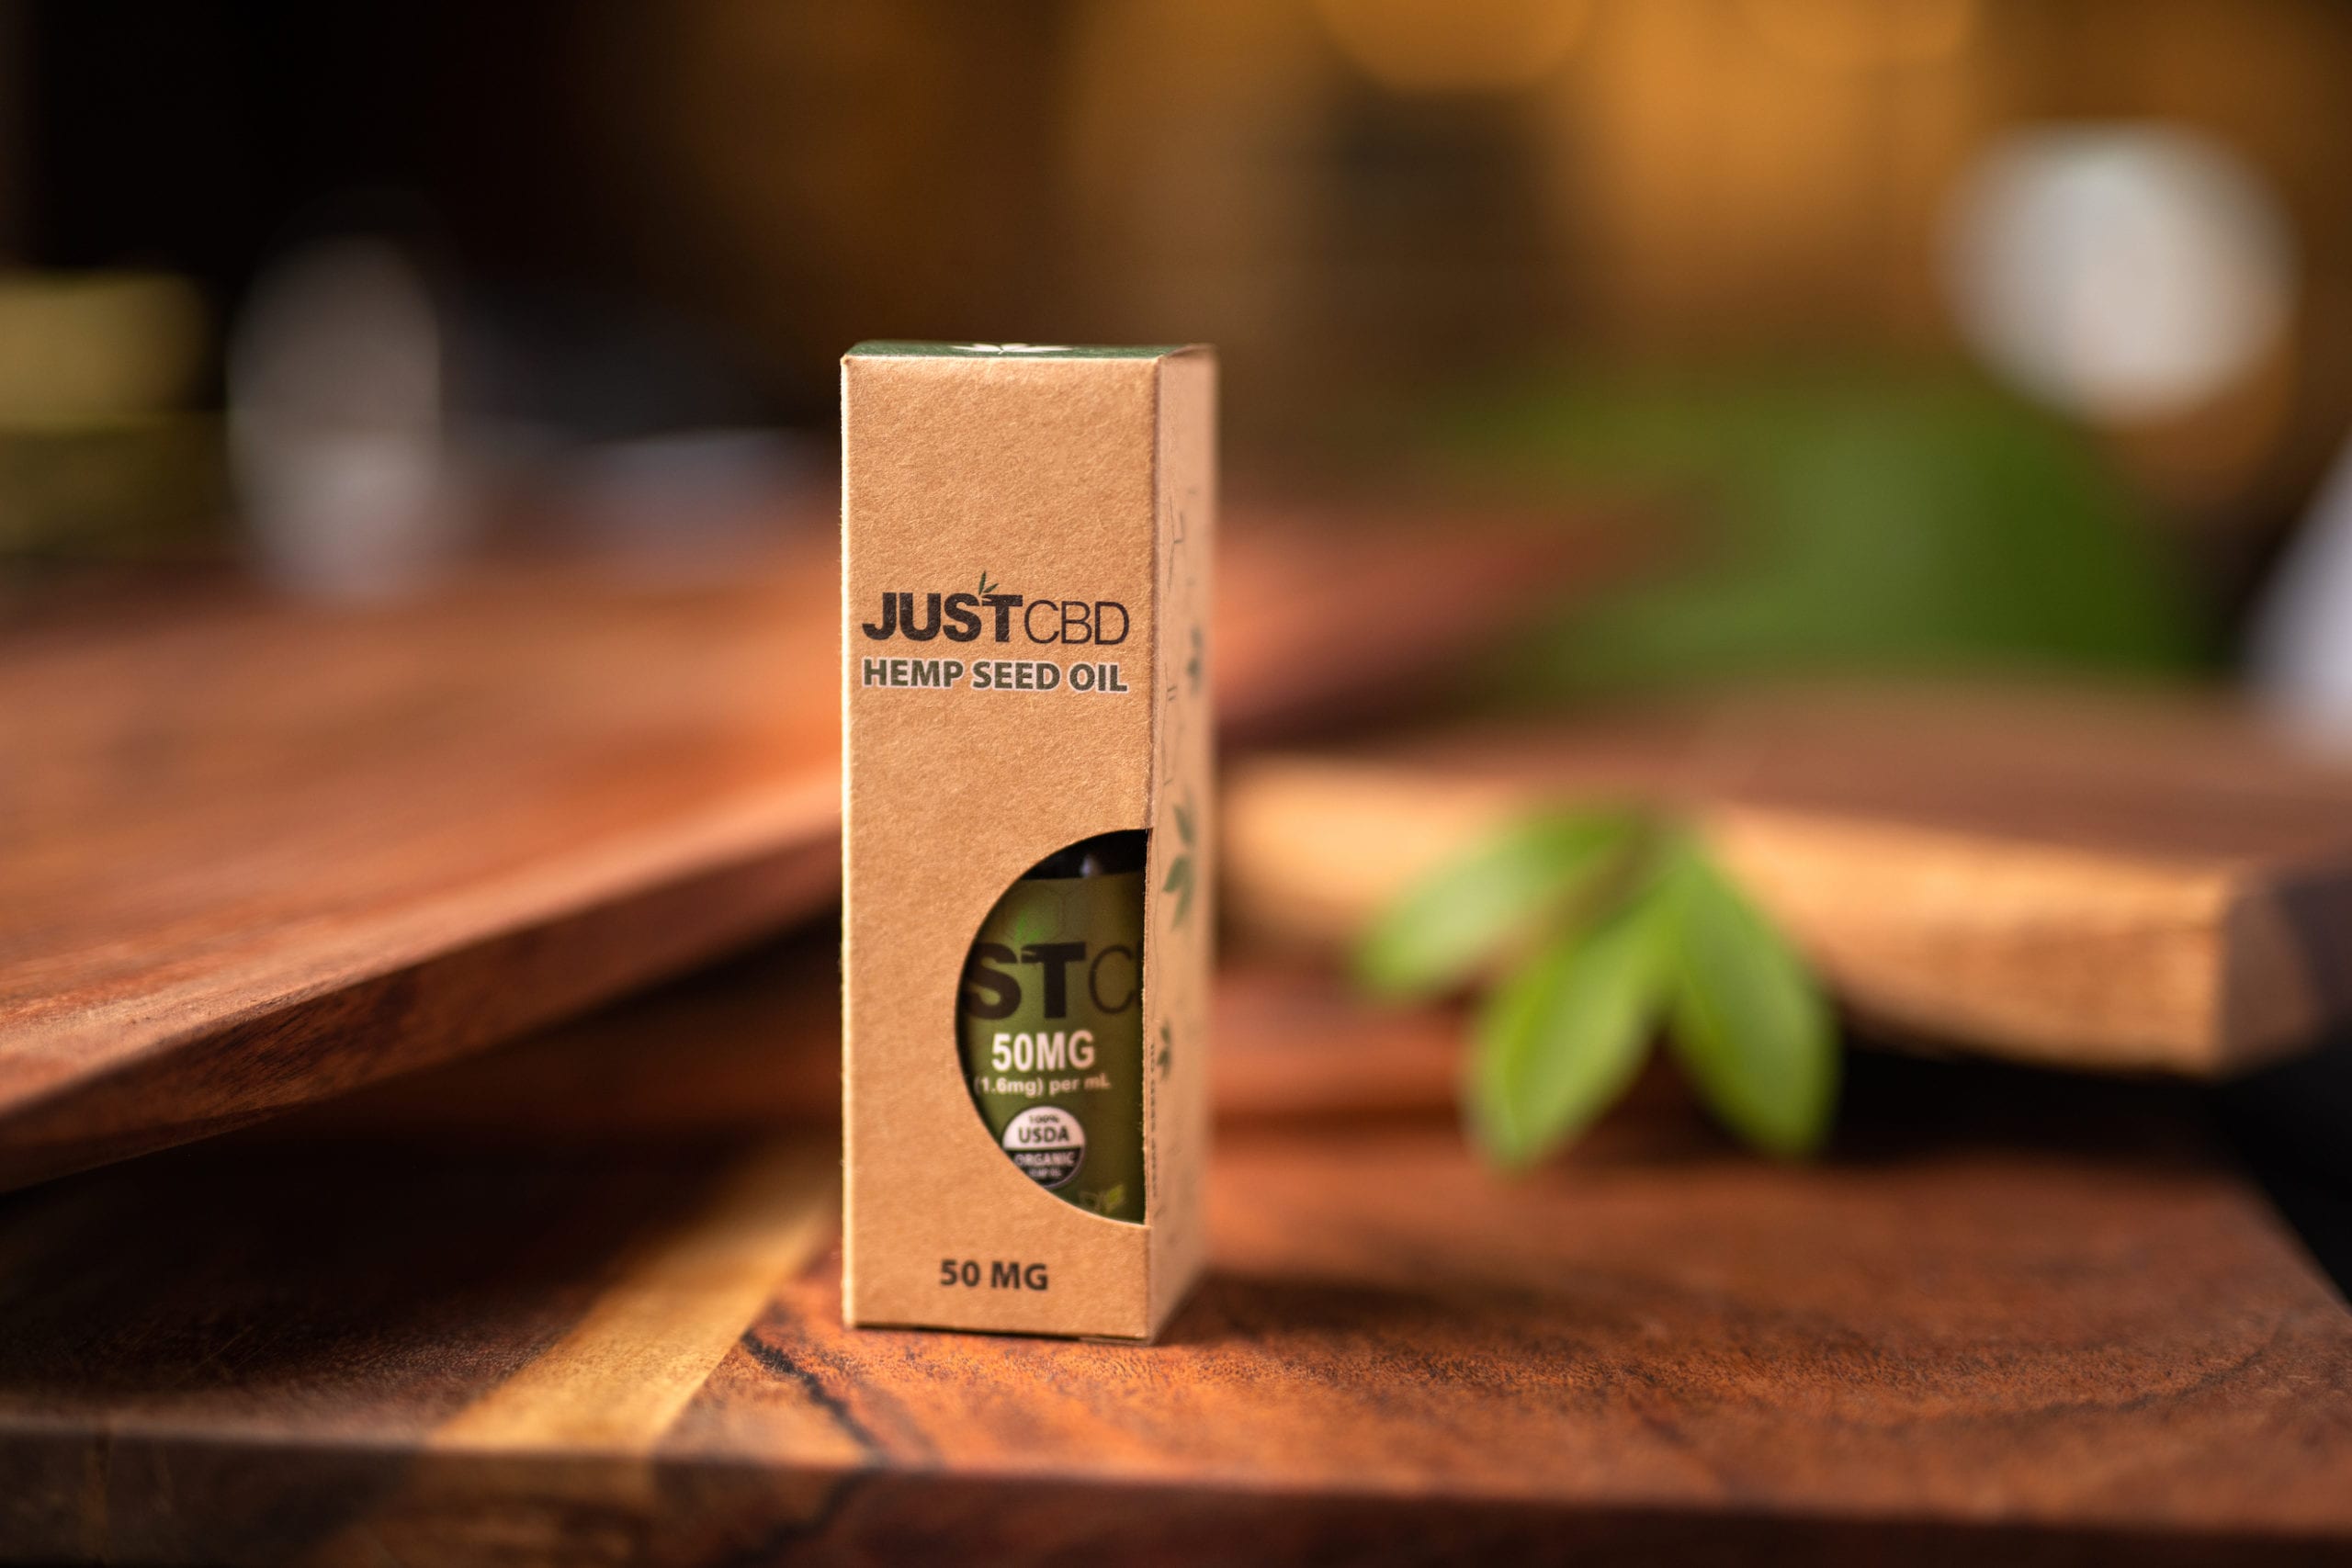 JustCBD Product Photography and JustCBD Products JustCBD Hemp Seed Oil container on display on a wooden table